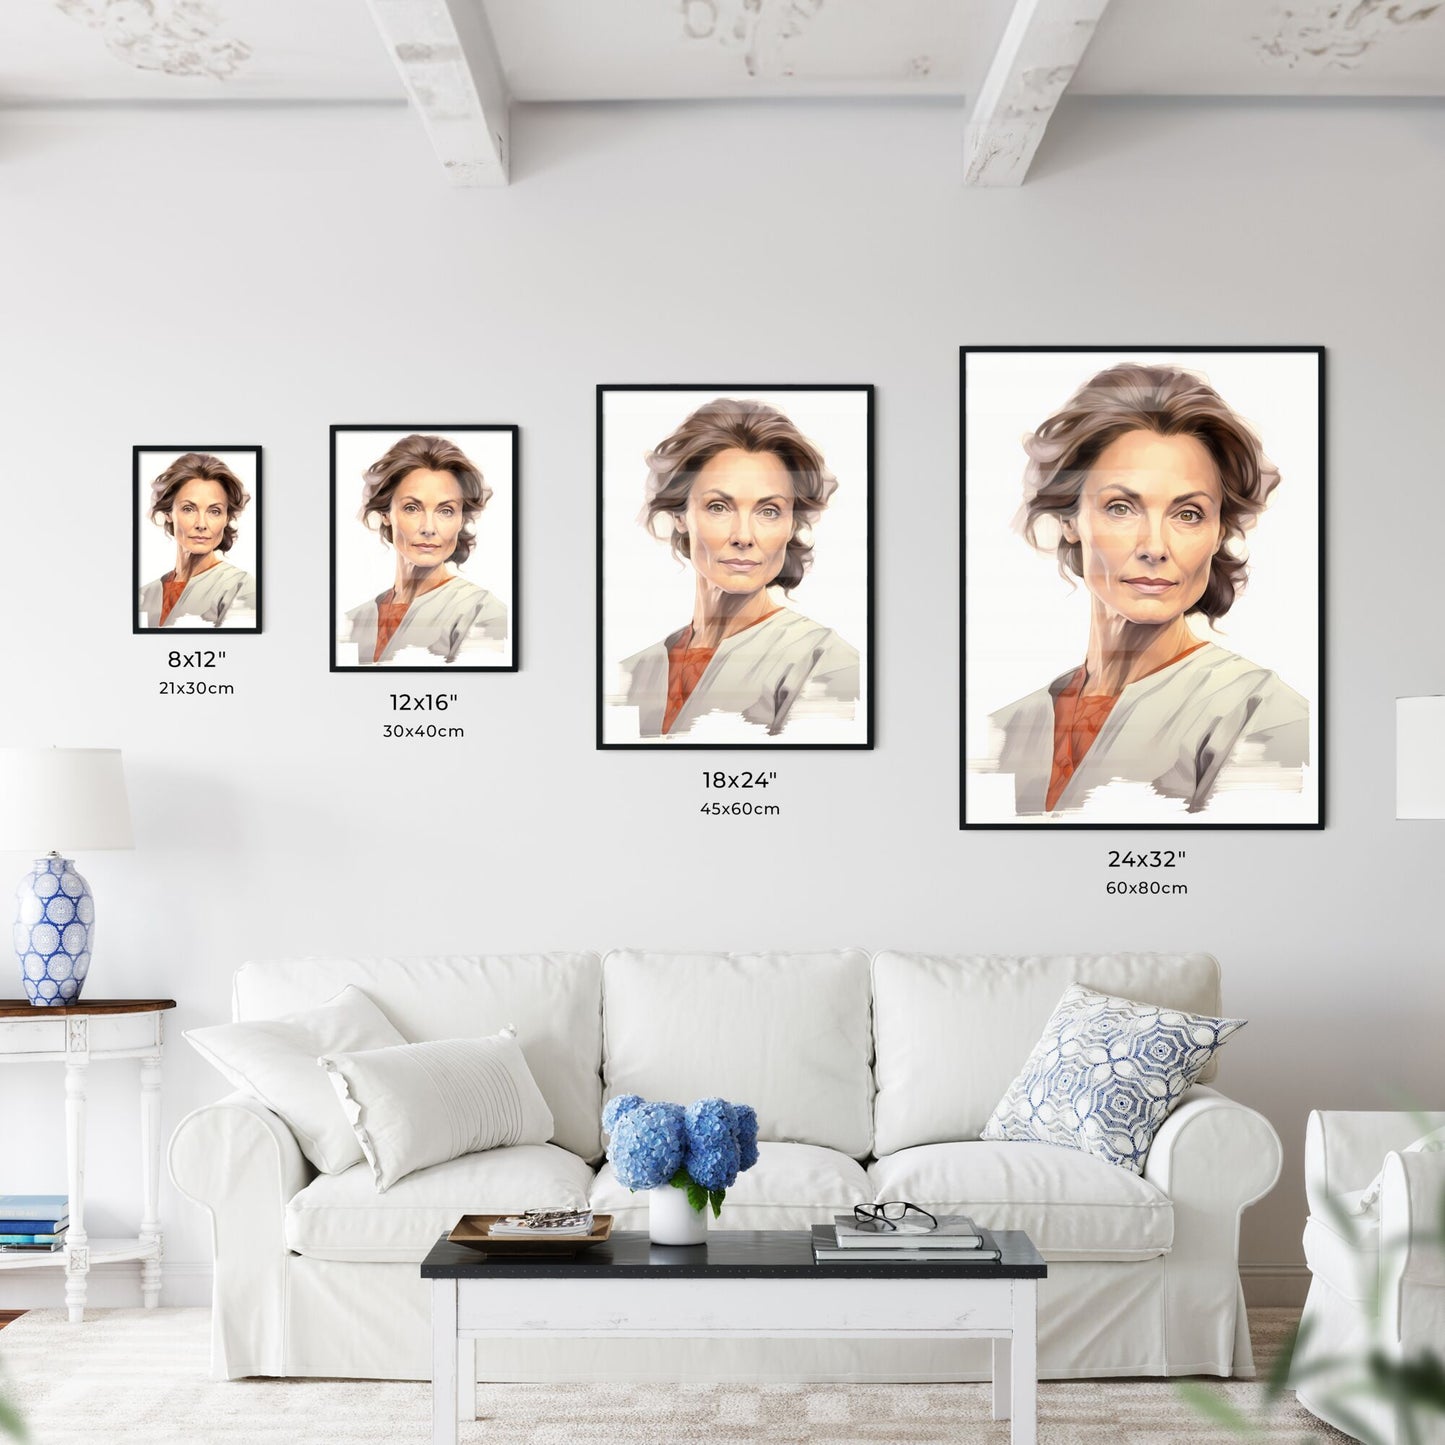 A Poster of beautiful mature woman 50 years old - A Woman With Brown Hair Default Title